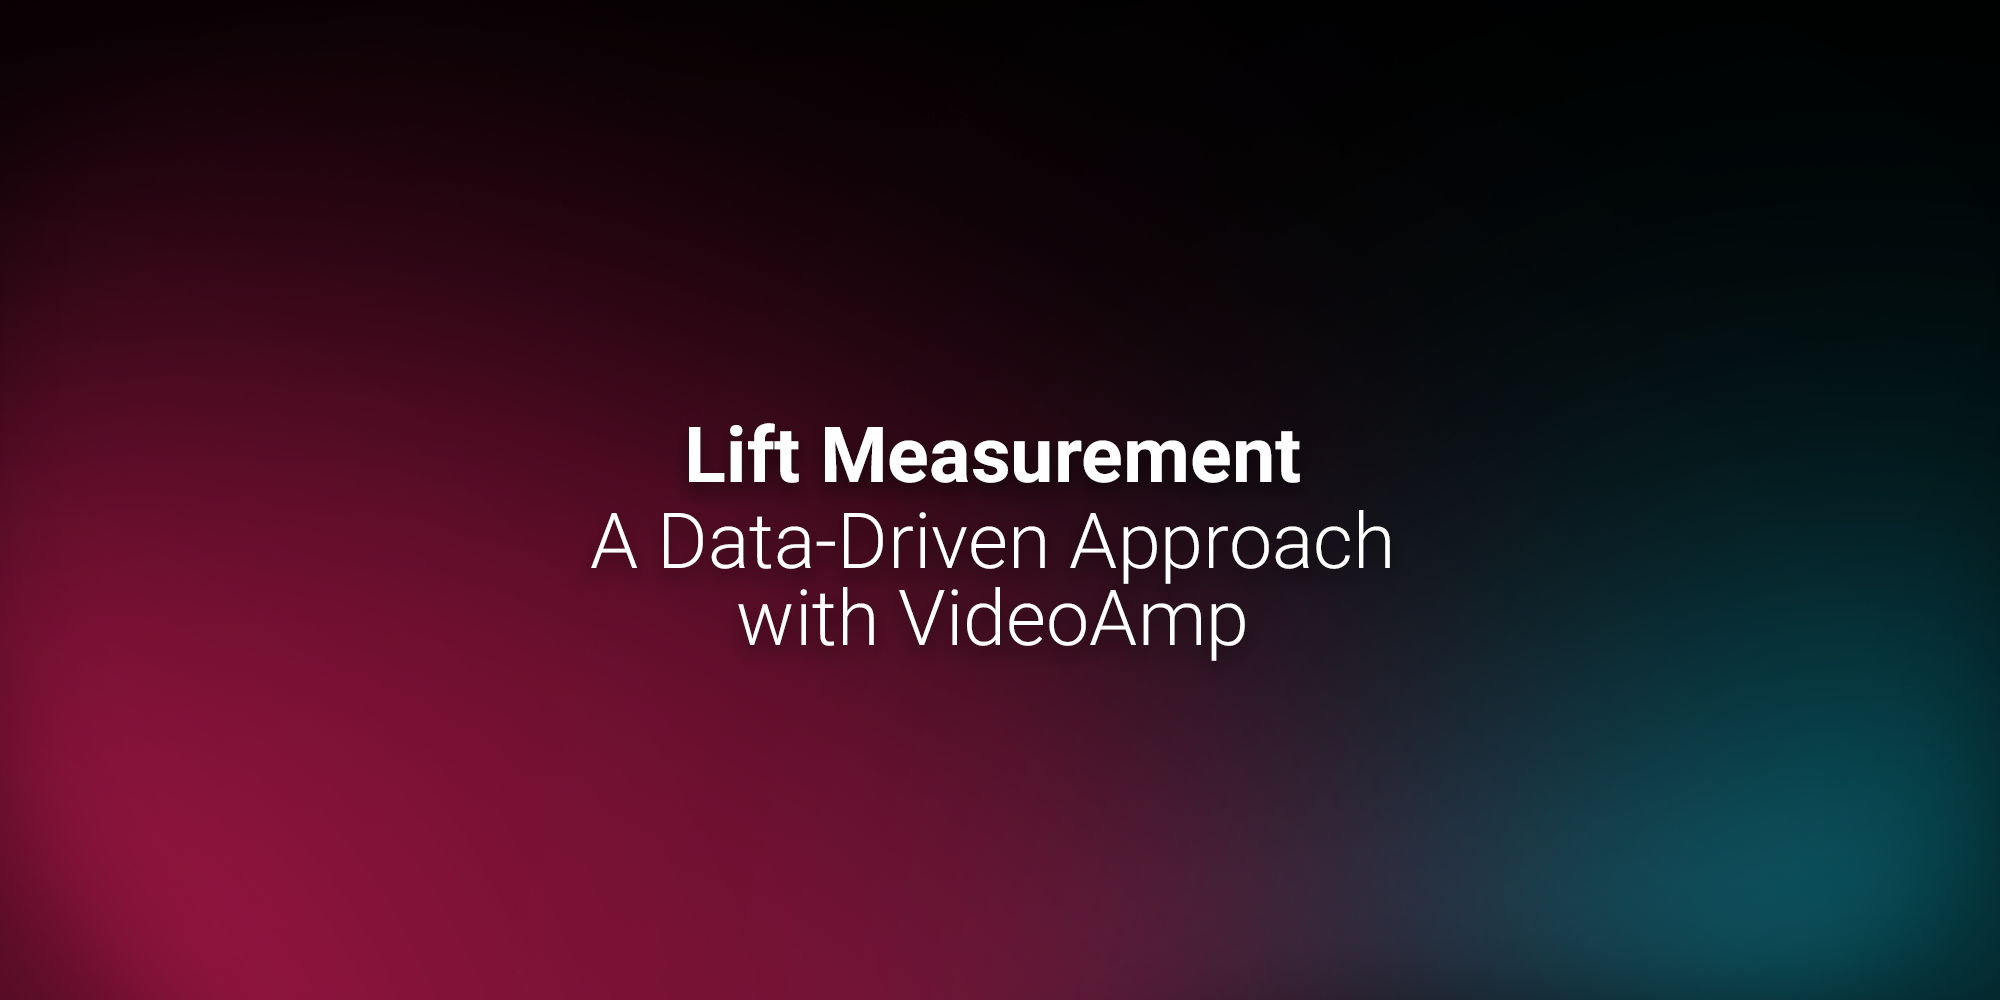 Featured image for Lift Measurement Now Available within the VideoAmp Platform